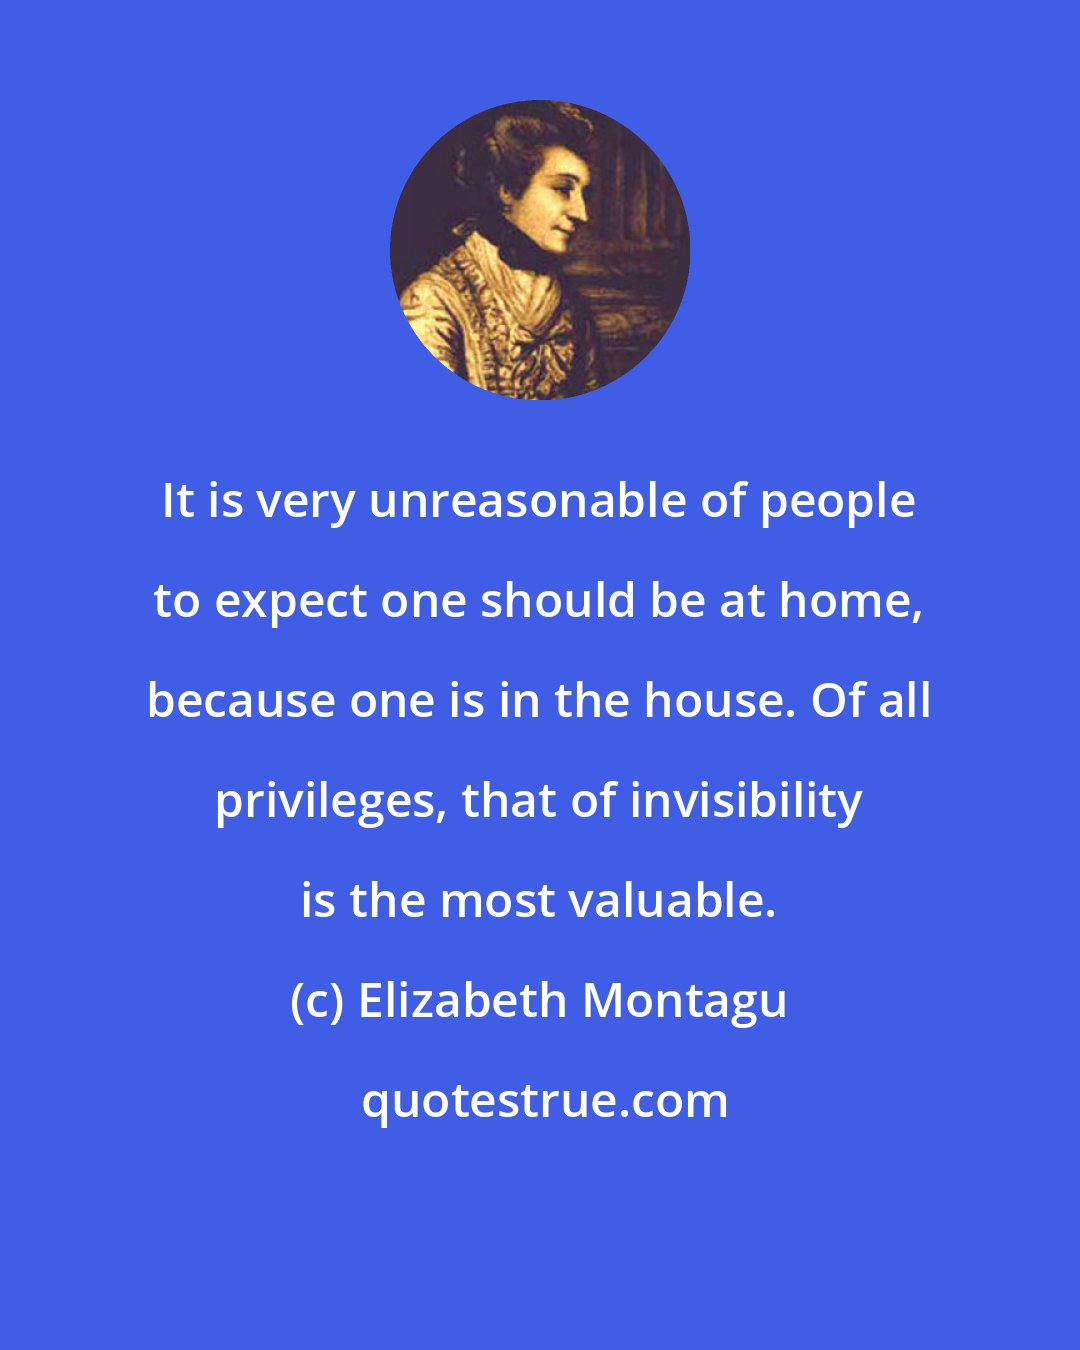 Elizabeth Montagu: It is very unreasonable of people to expect one should be at home, because one is in the house. Of all privileges, that of invisibility is the most valuable.